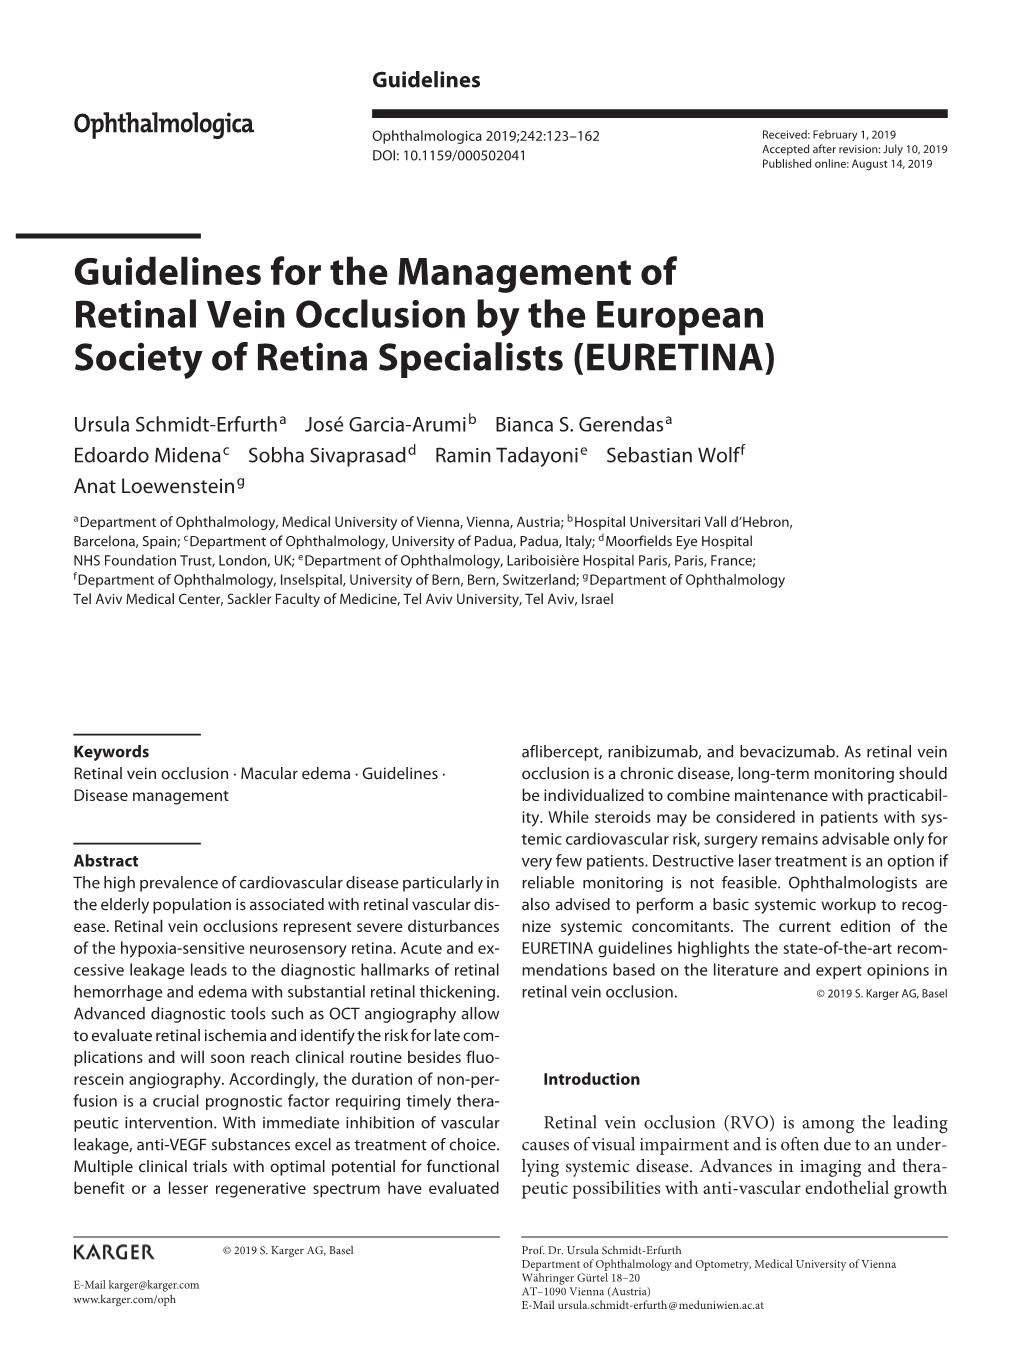 Guidelines for the Management of Retinal Vein Occlusion by the European Society of Retina Specialists (EURETINA)